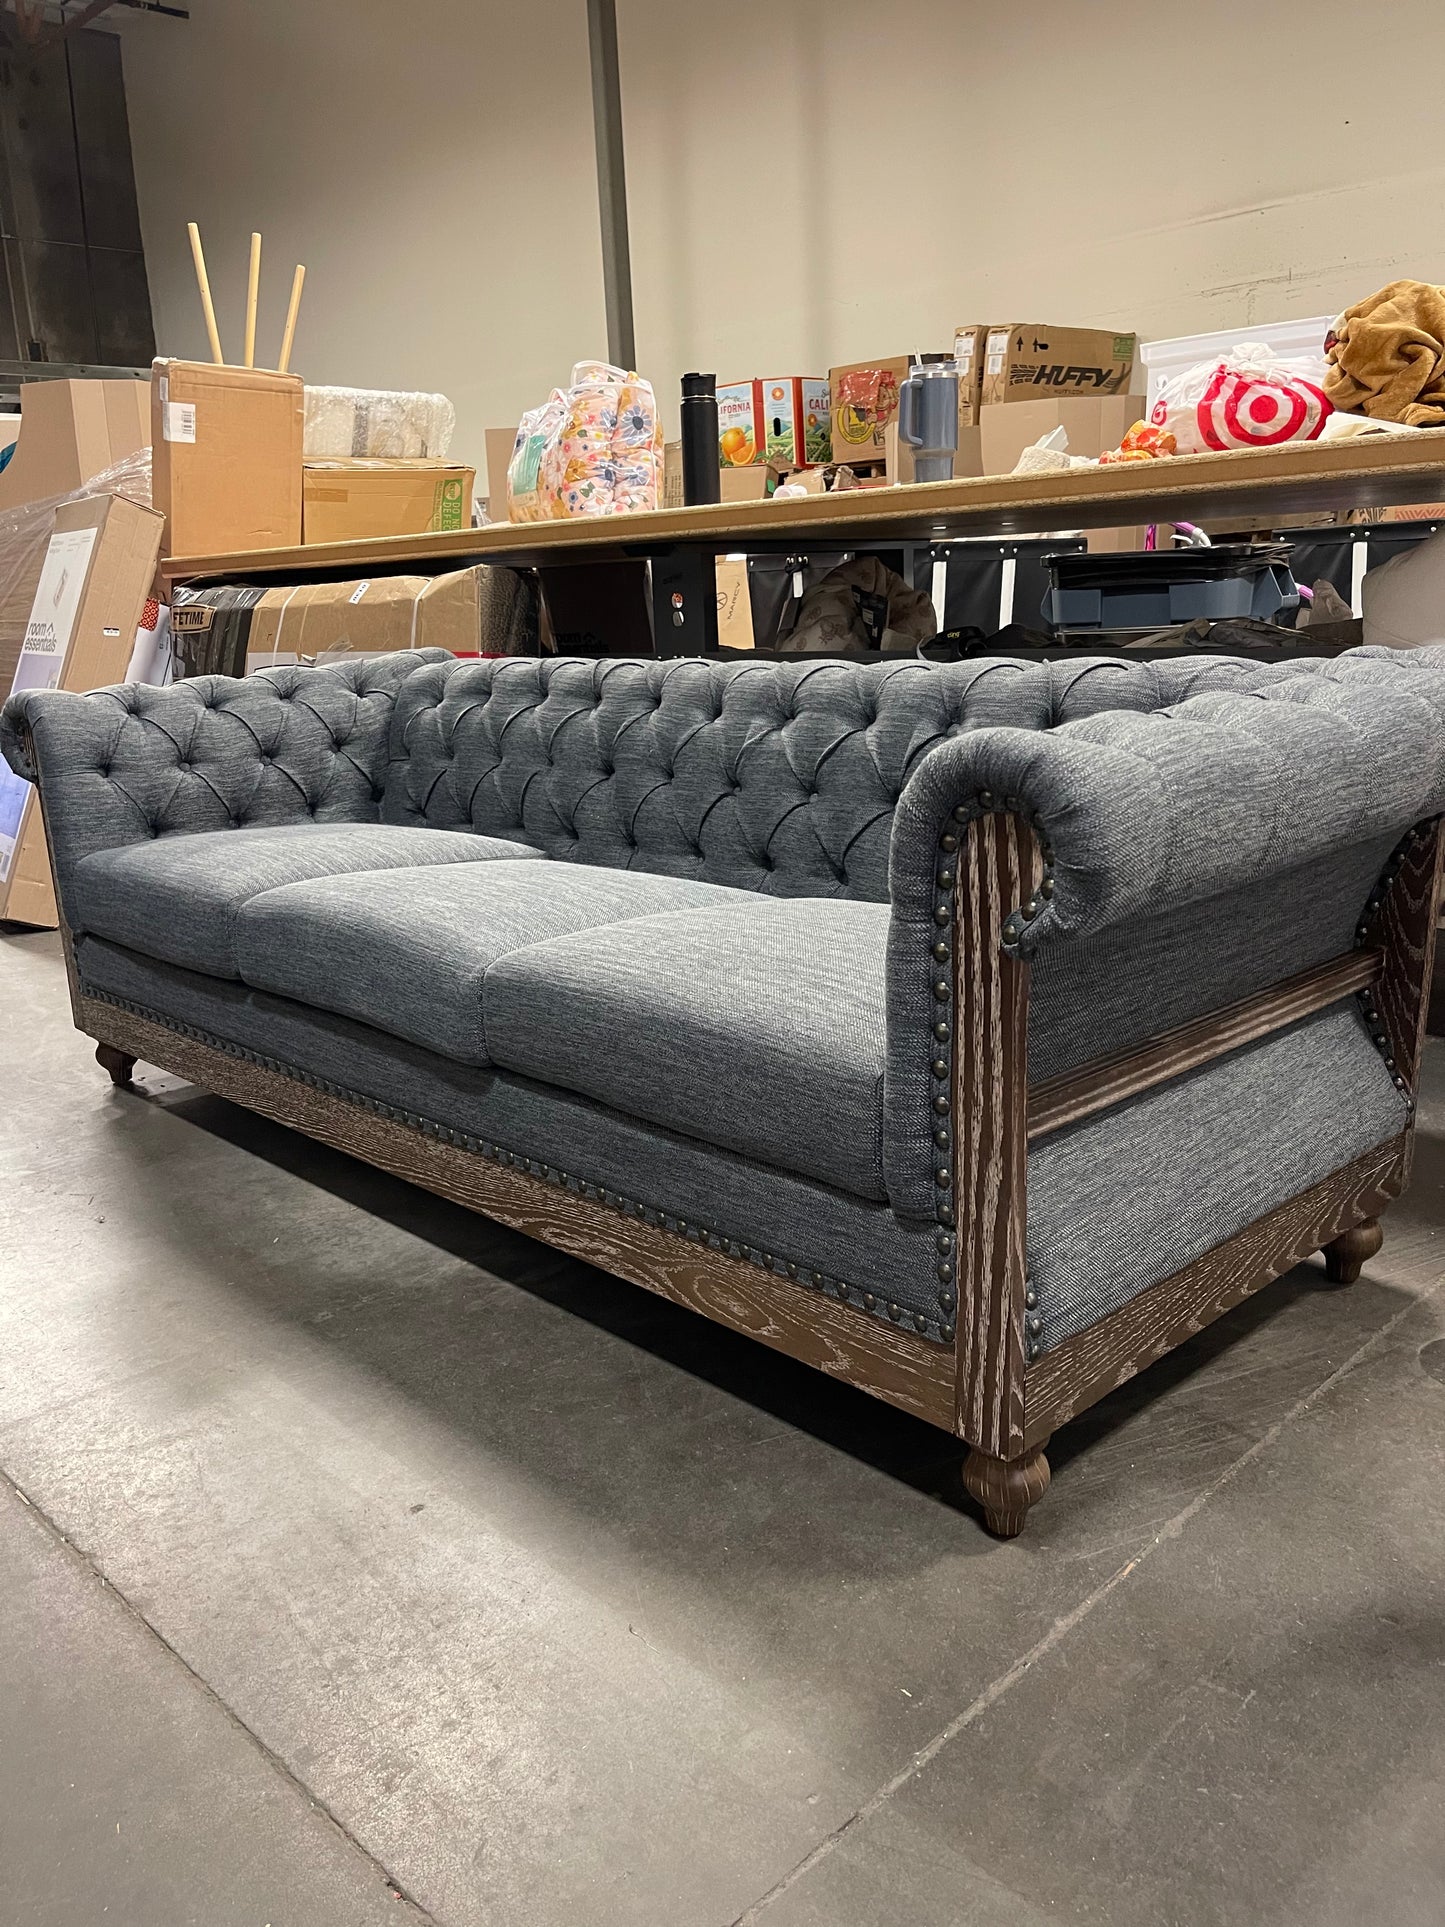 Saragus Chesterfield Tufted 3 Seater Sofa with Nailhead Trim Charcoal/Dark Brown - Christopher Knight HomeDAMAGED